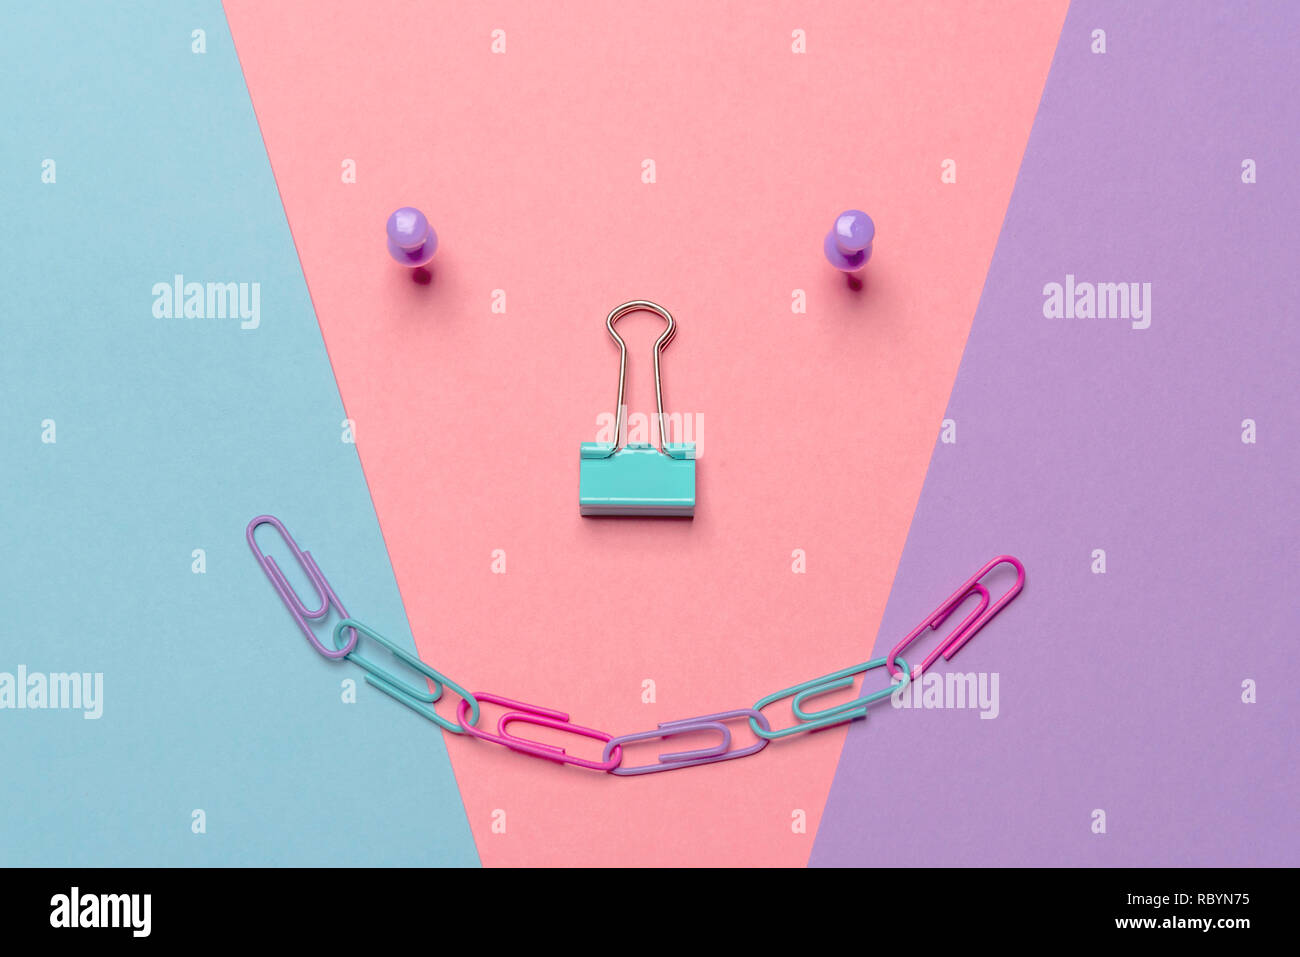 Office objects arranged in the form of a smiley on a colorful paper background. Flat lay image in the minimalist style Stock Photo